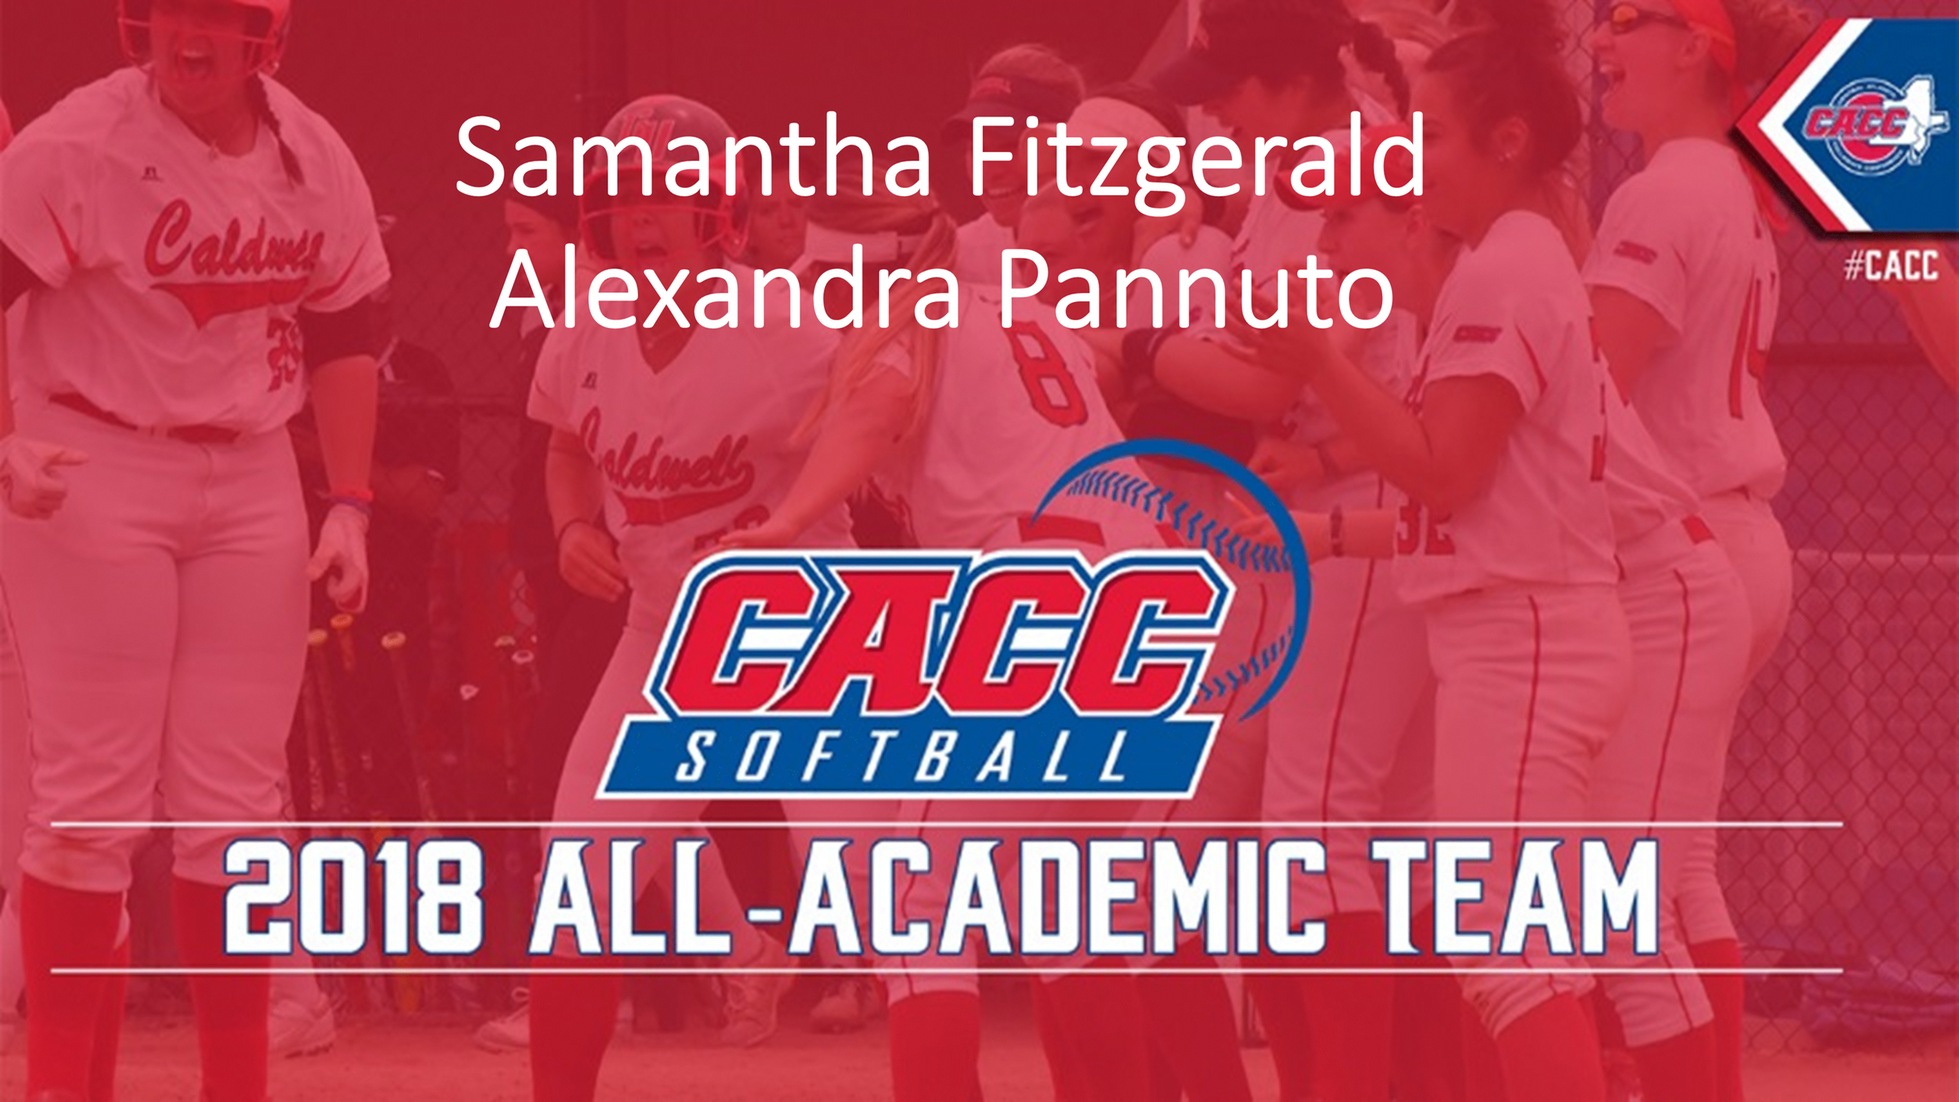 The CACC released the 2018 CACC All-Academic Softball Team.